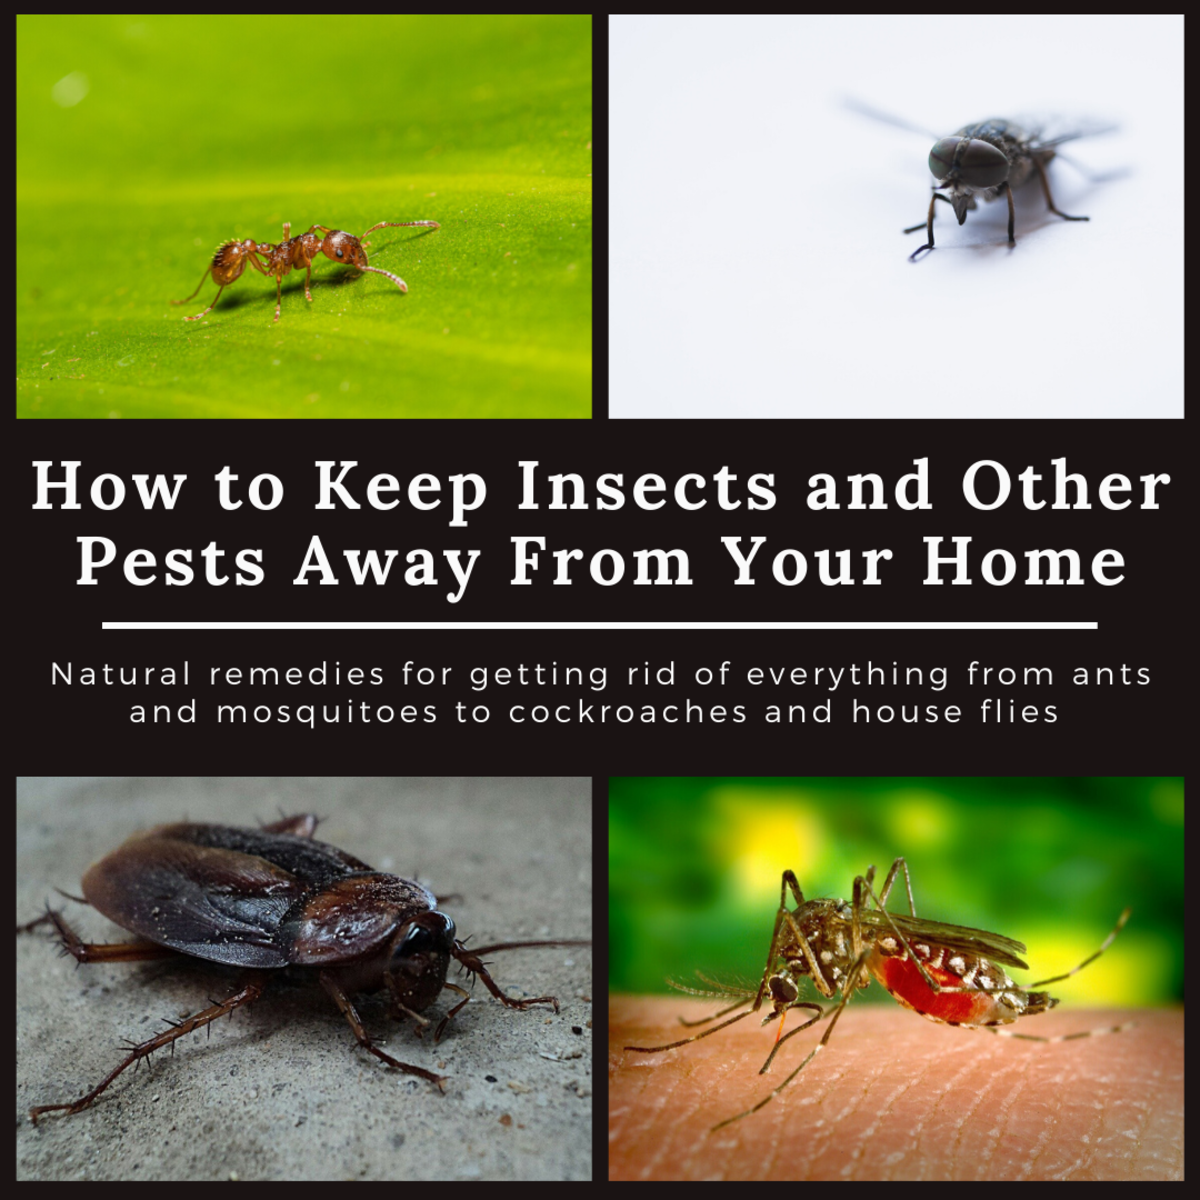 Home Remedies to Keep Cockroaches, Lizards, Ants